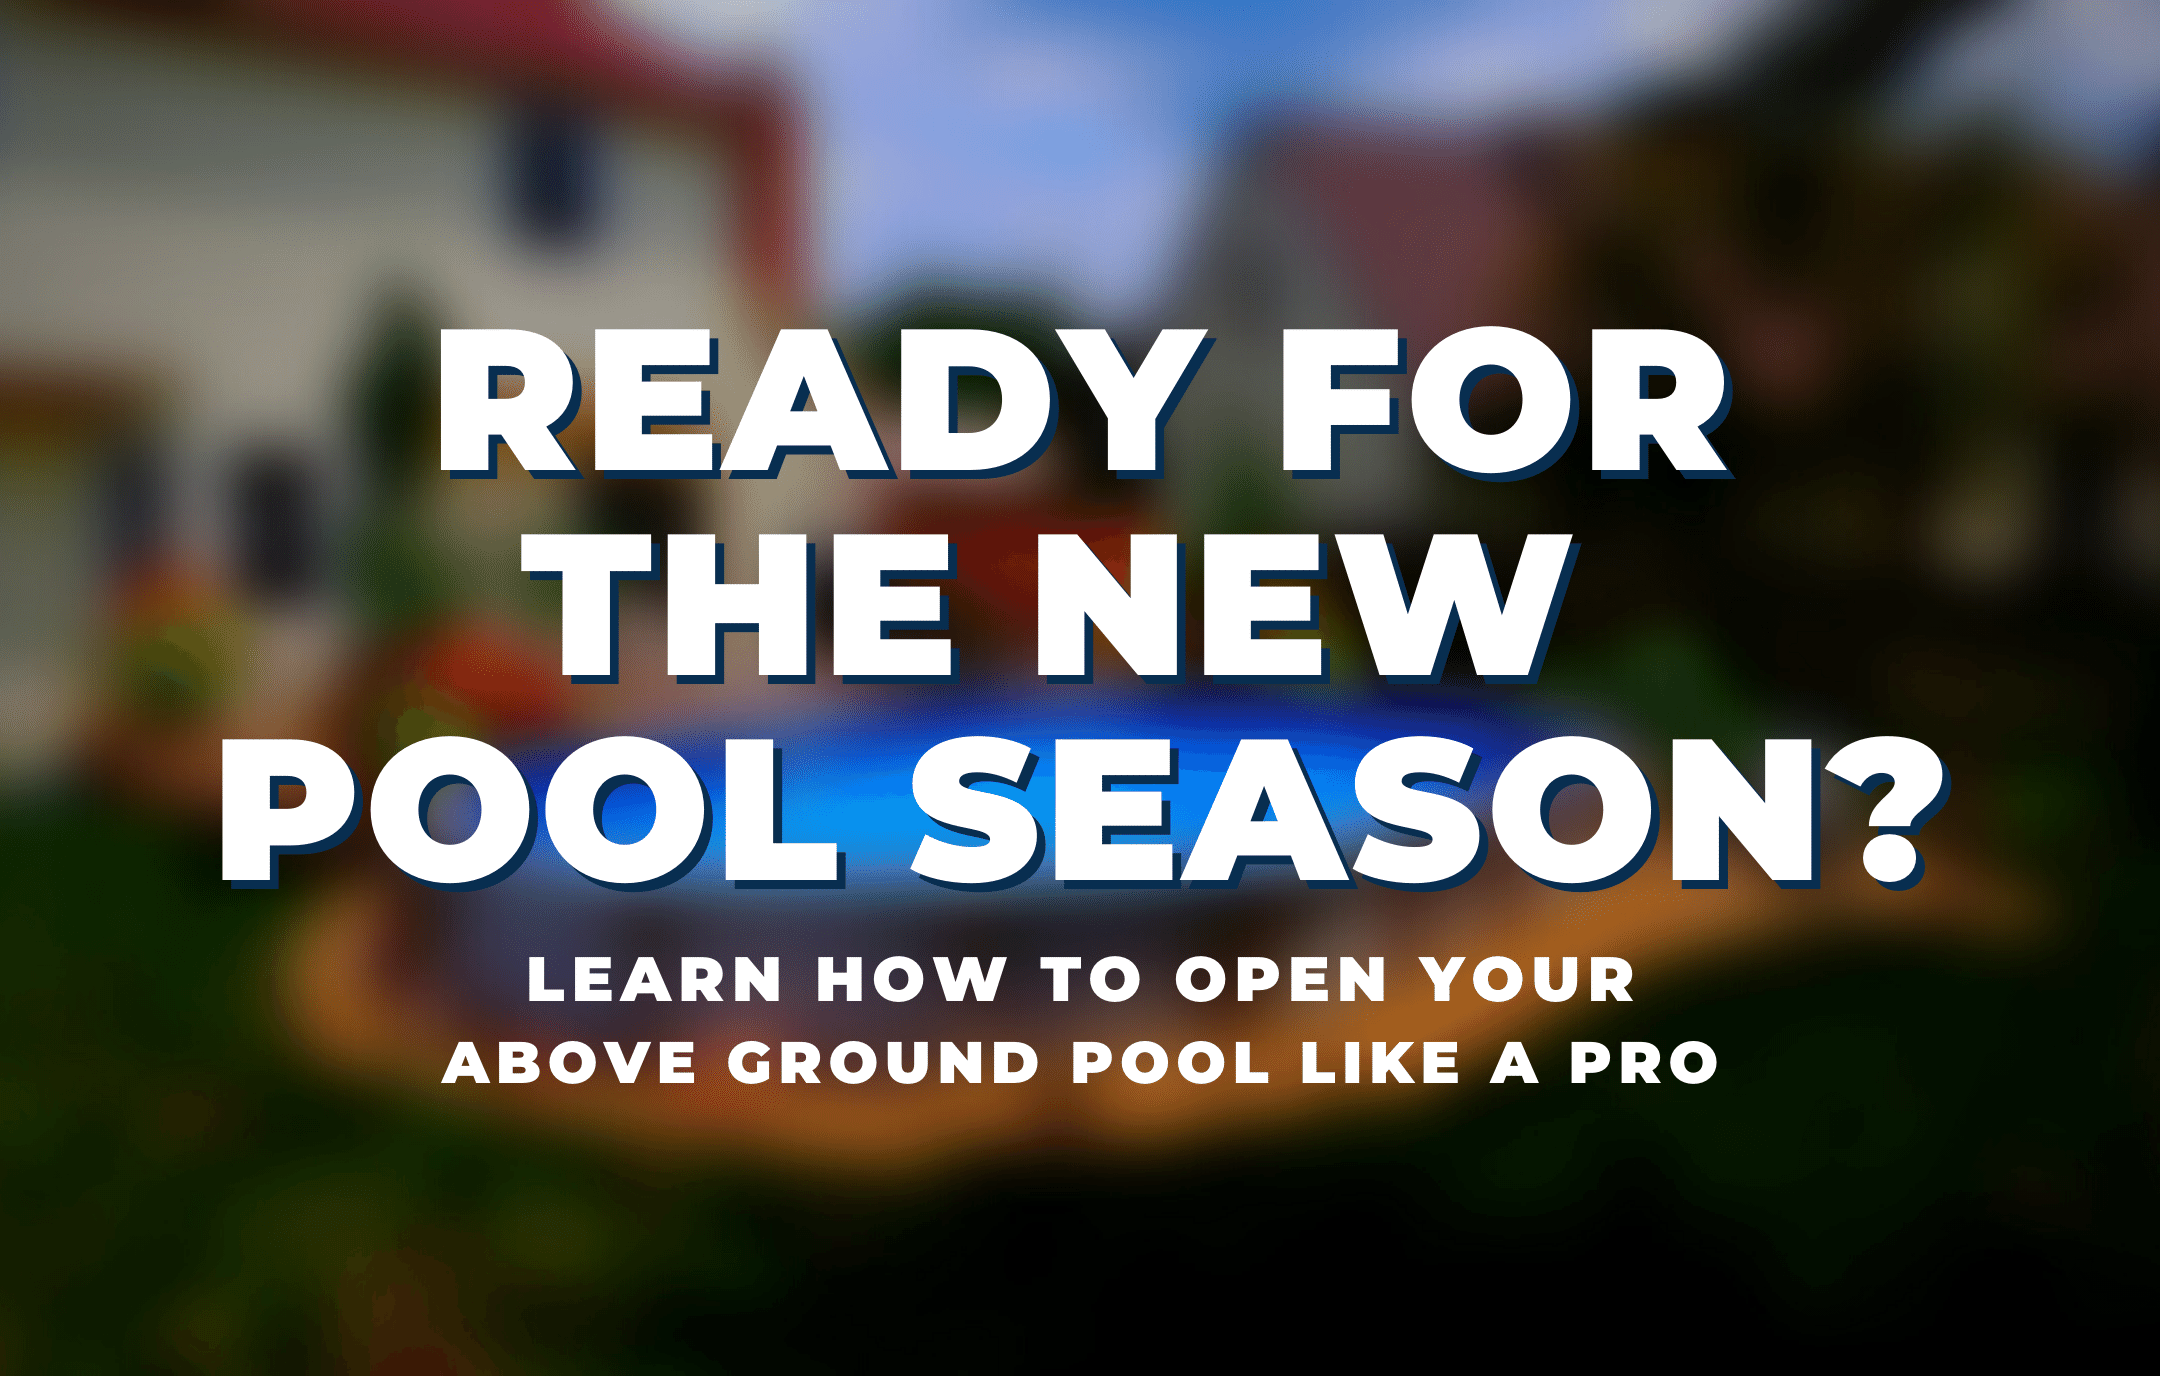 ready-for-new-season-learn-how-to-open-pool-pro (1).png__PID:53dd4509-77b0-4eab-b70d-ff1f81fd8851